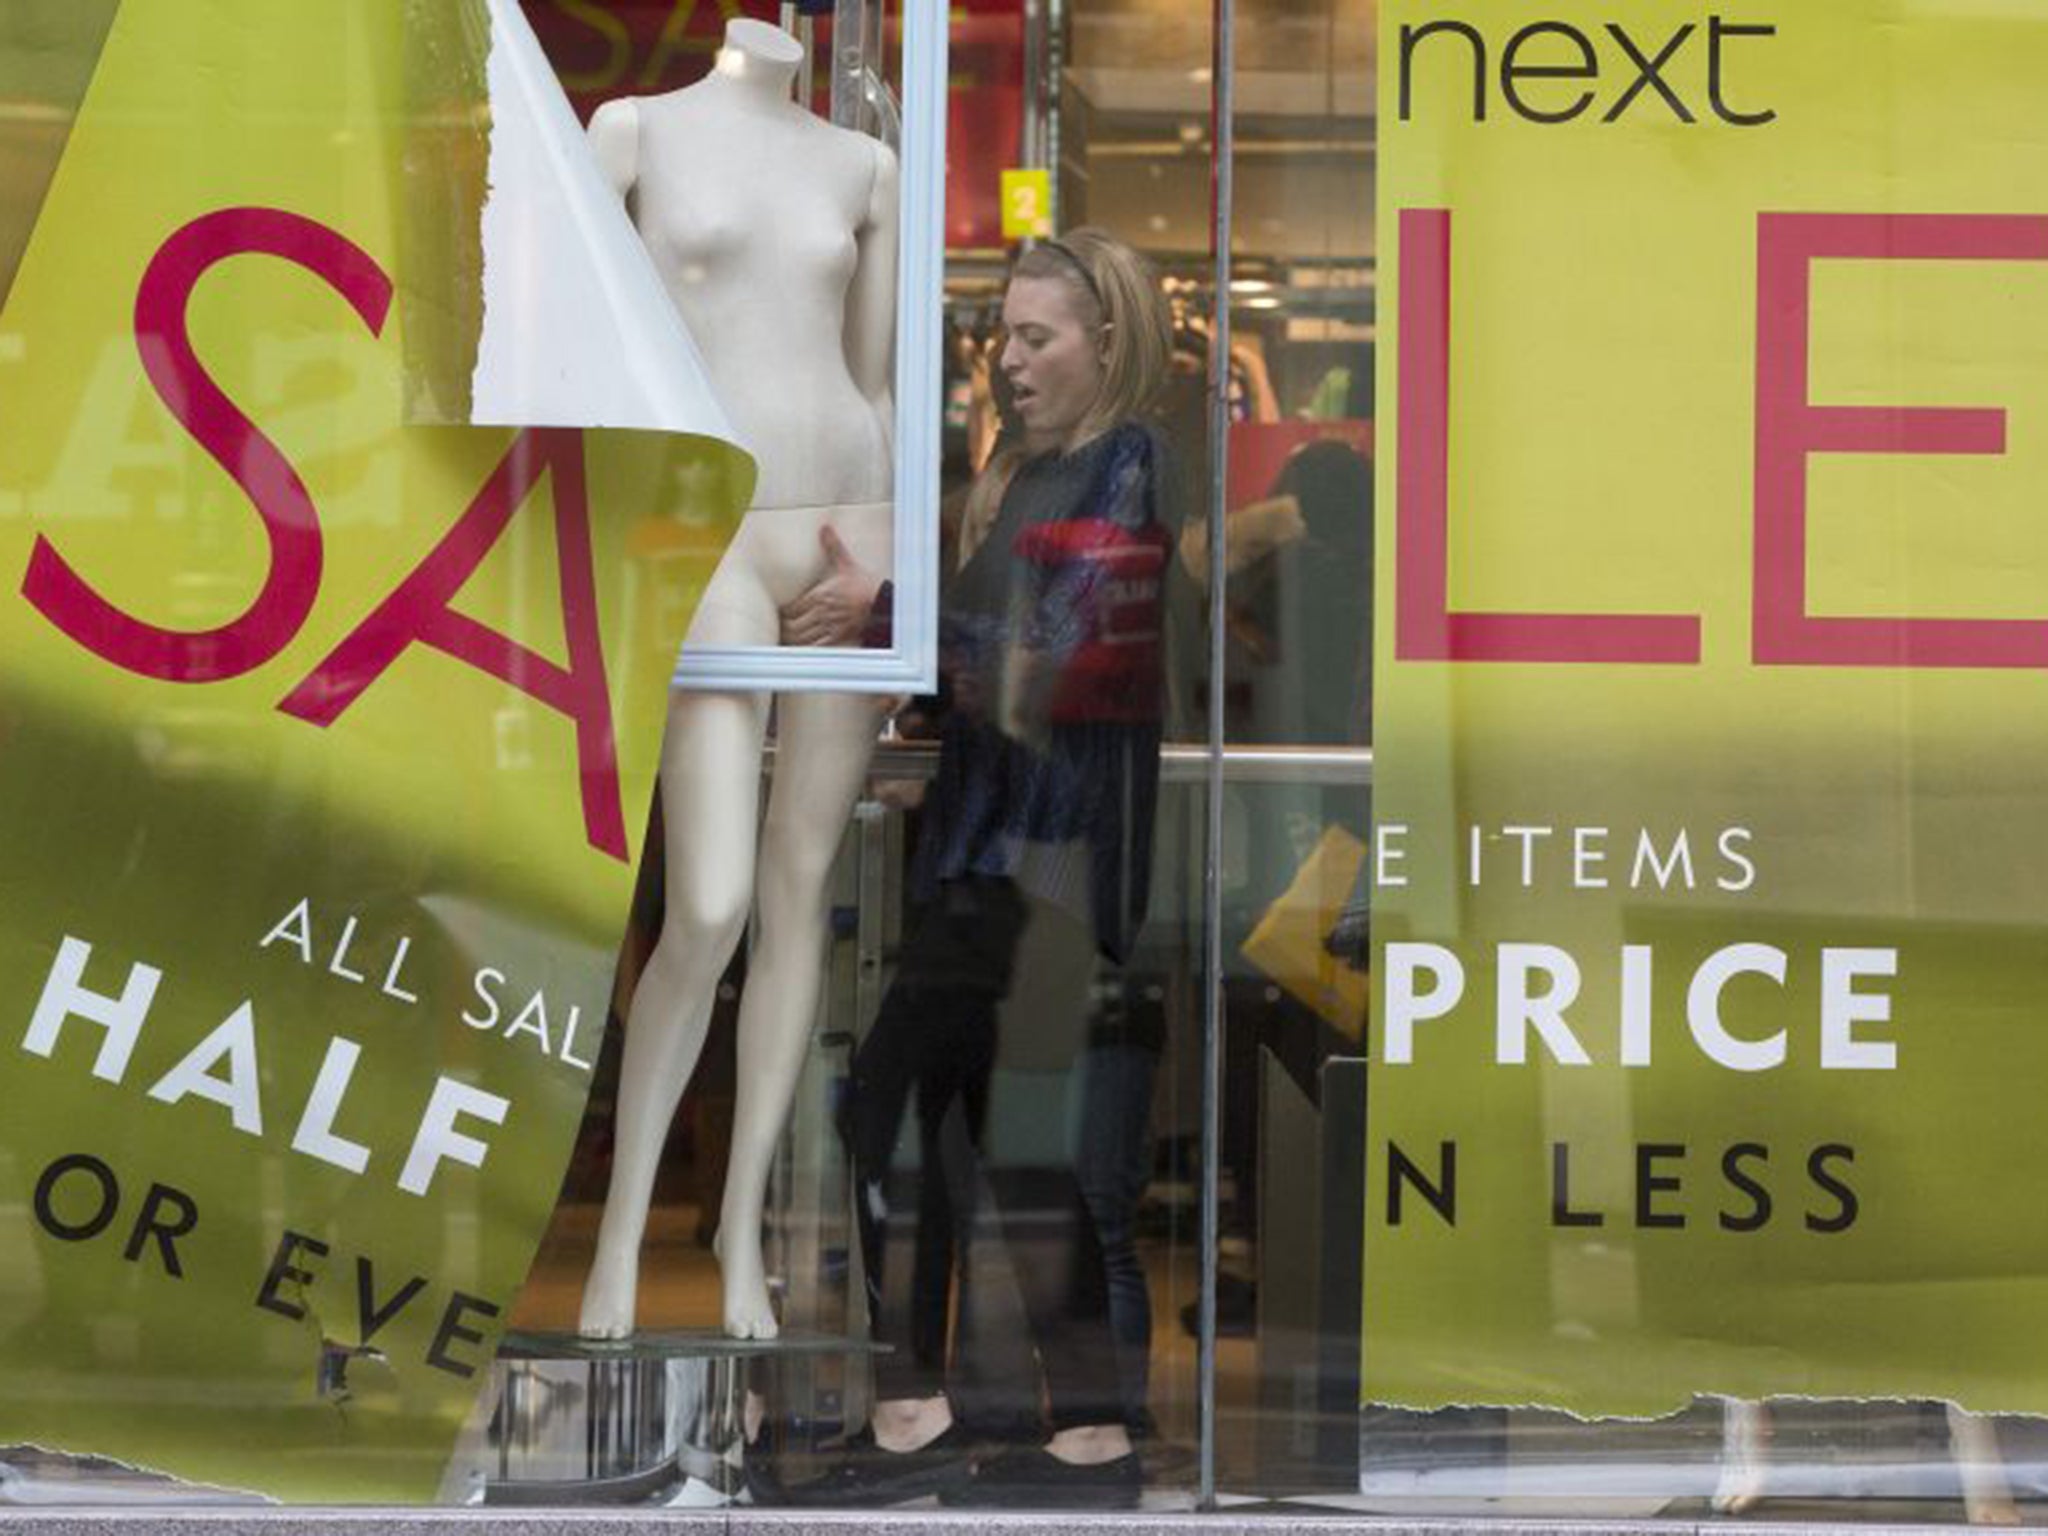 Shares in the fashion chain rose 2 per cent as profit came in ahead of City expectations